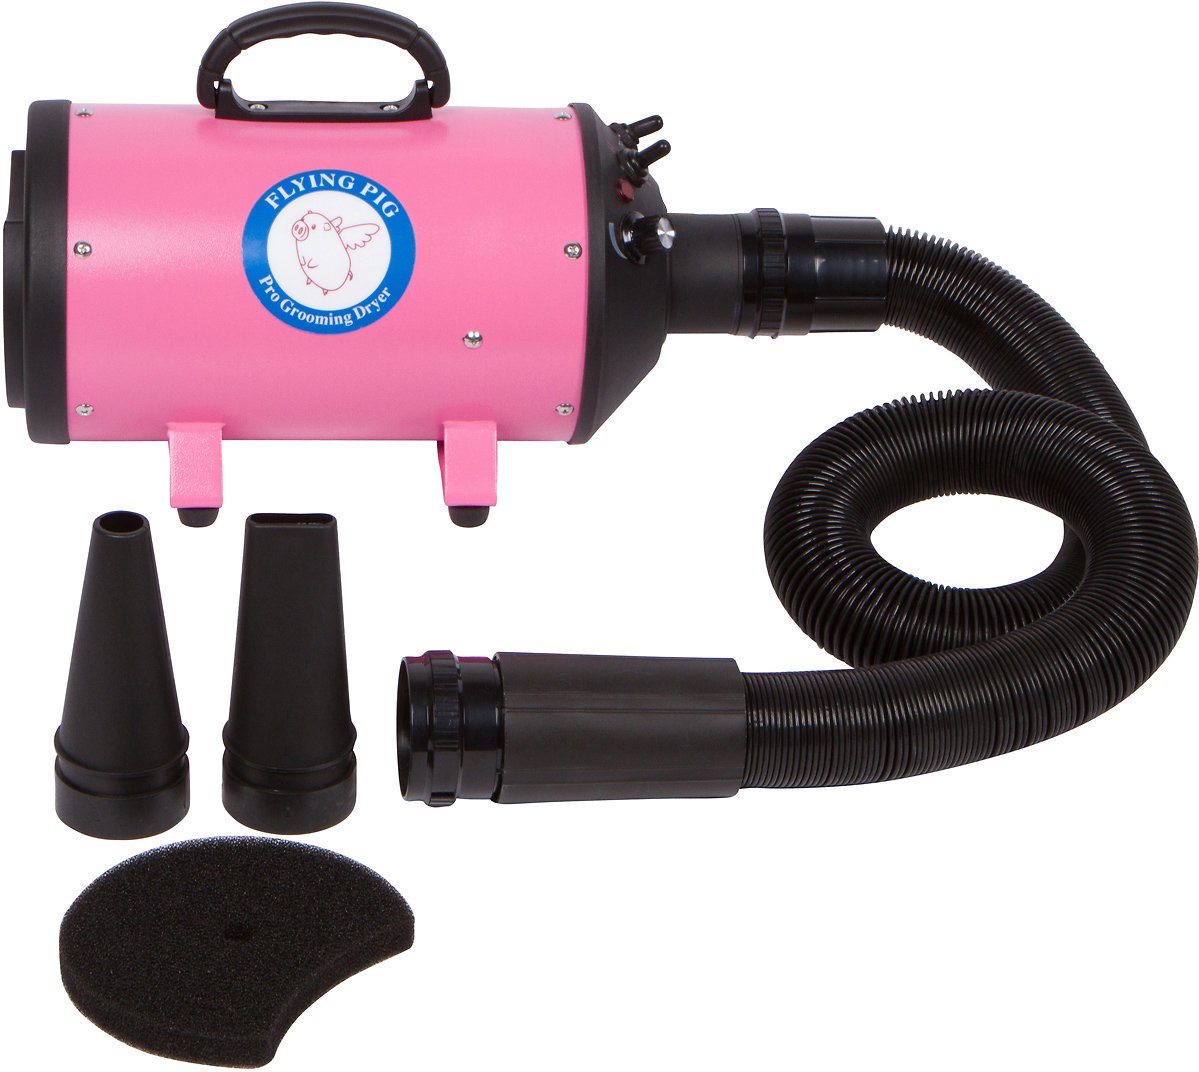 Flying Pig Stand Grooming Dryer